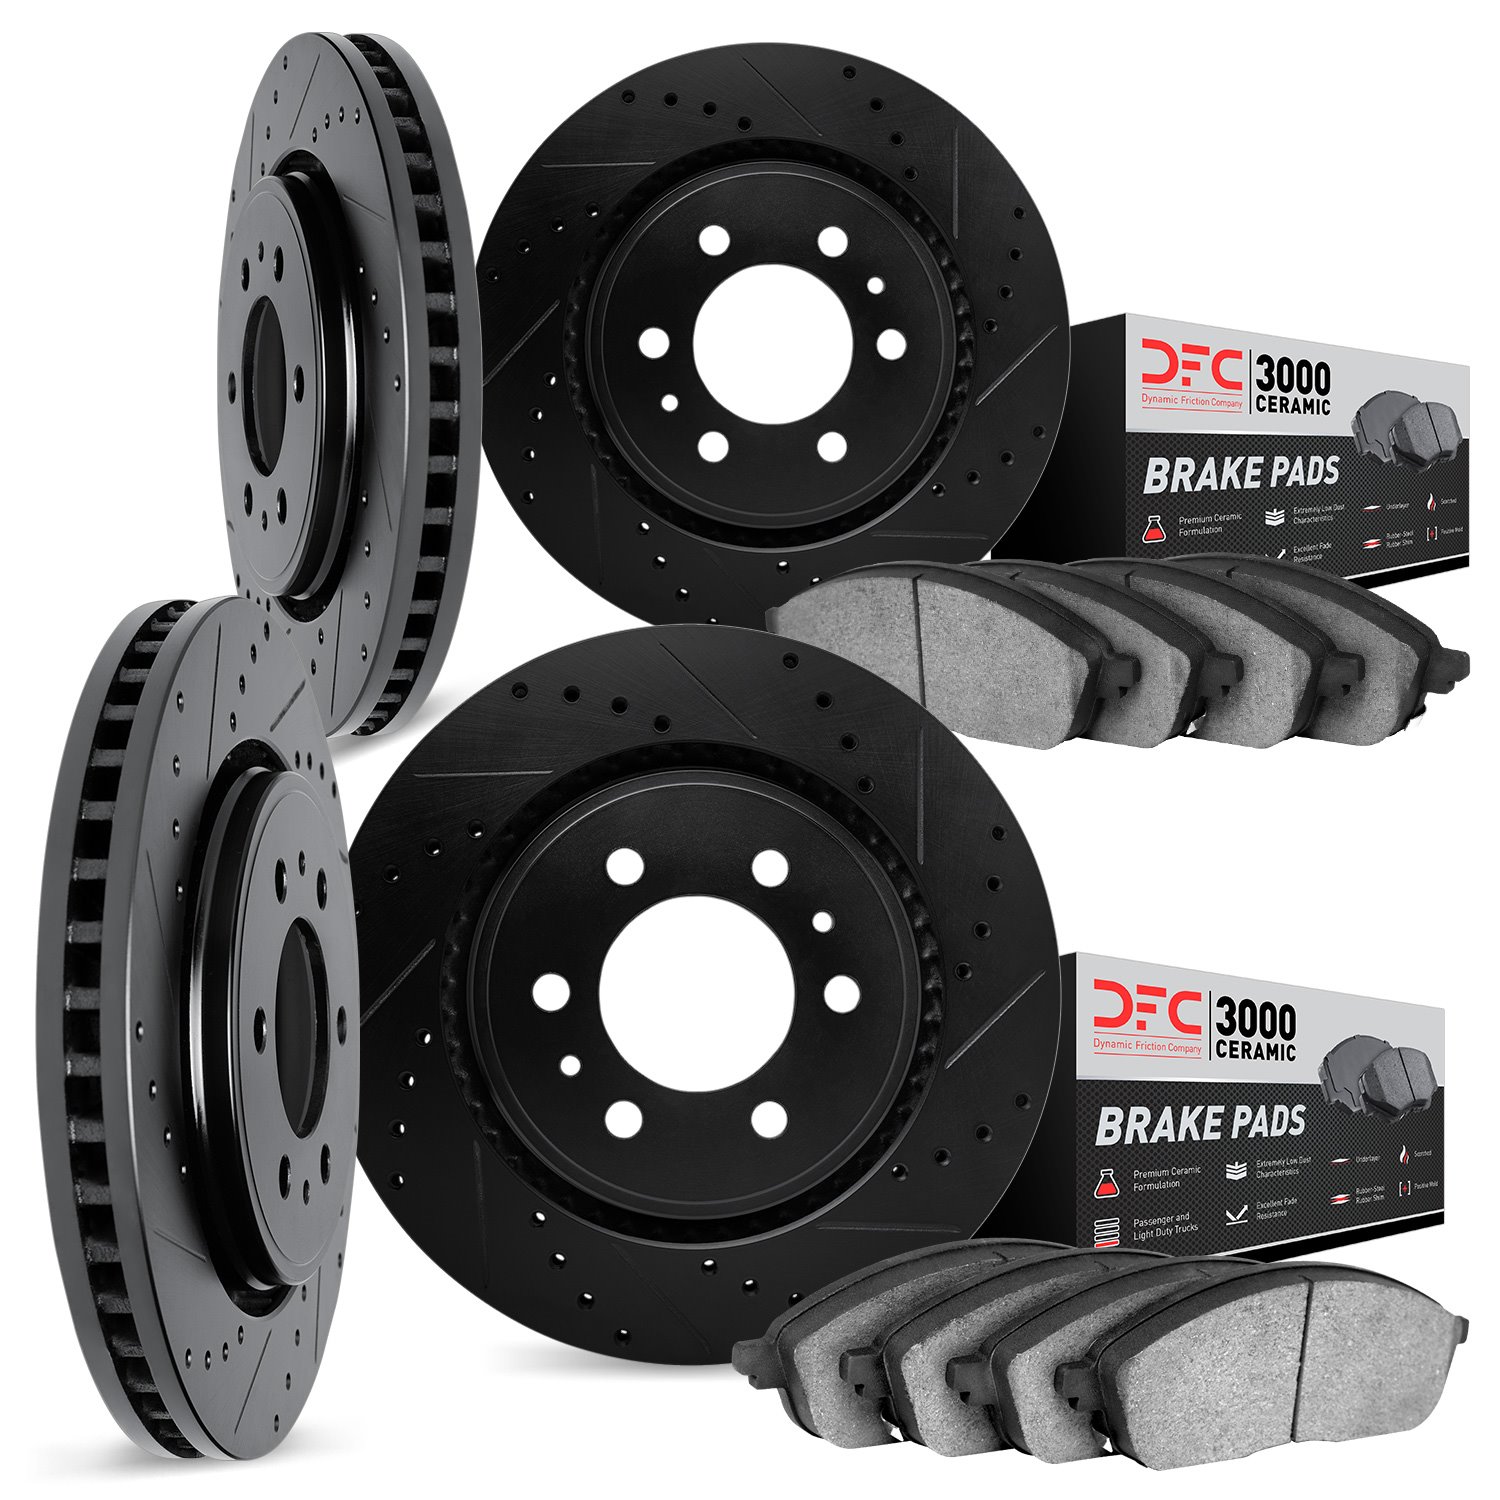 8304-40016 Drilled/Slotted Brake Rotors with 3000-Series Ceramic Brake Pads Kit [Black], 2003-2003 Mopar, Position: Front and Re